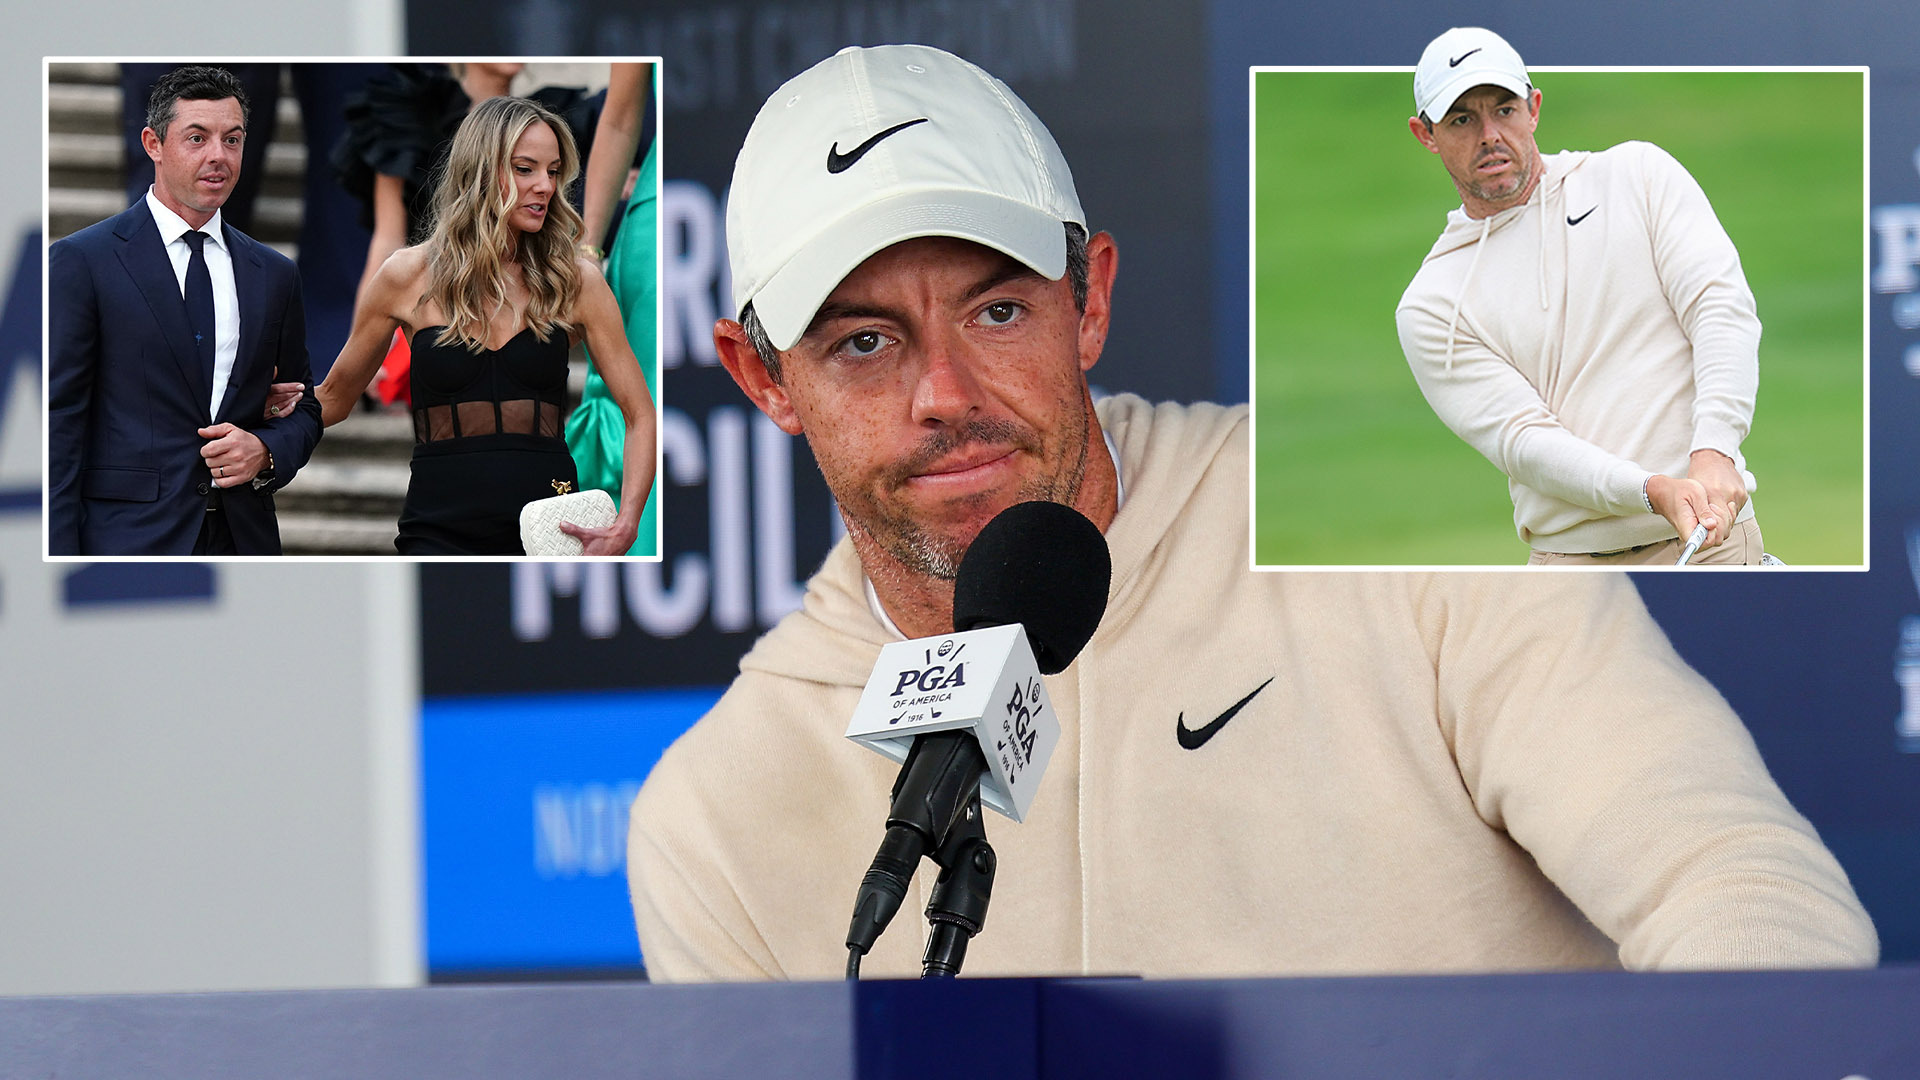 Rory McIlroy speaks for first time & refuses to take questions about divorce from Erica Stoll ahead of PGA championship [Video]